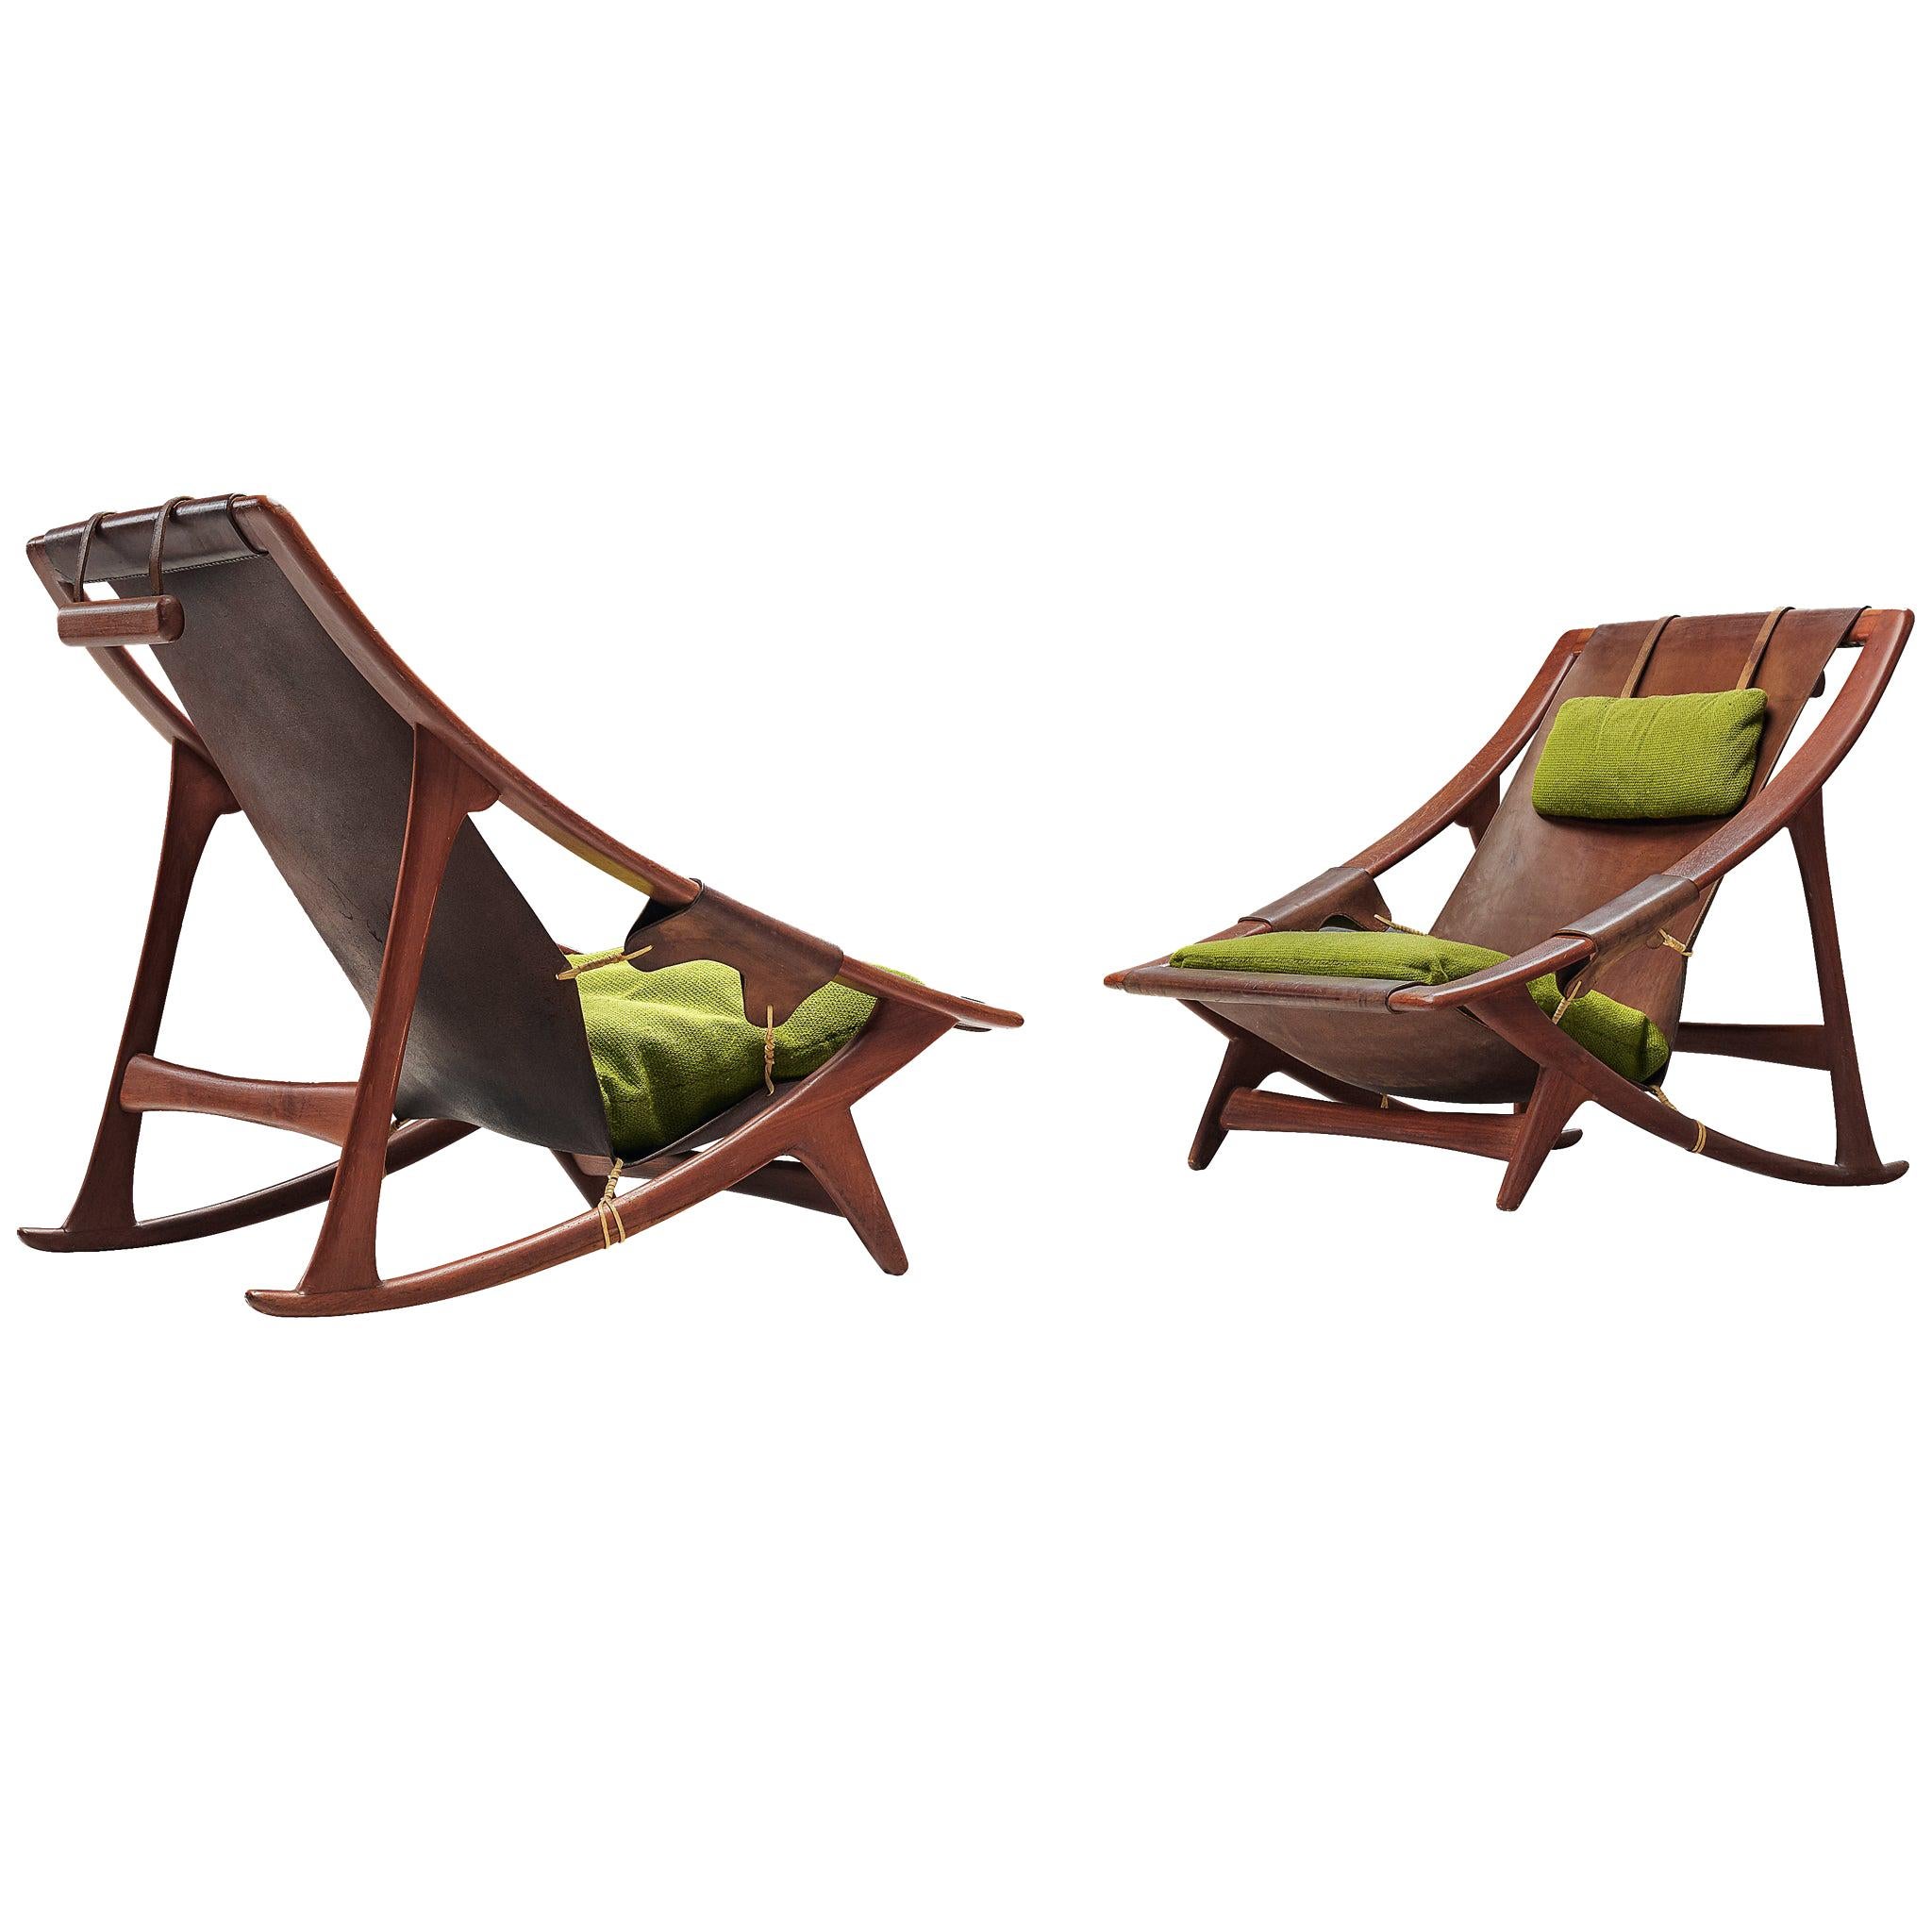 Andersag Lounge Chairs in Patinated Cognac Leather